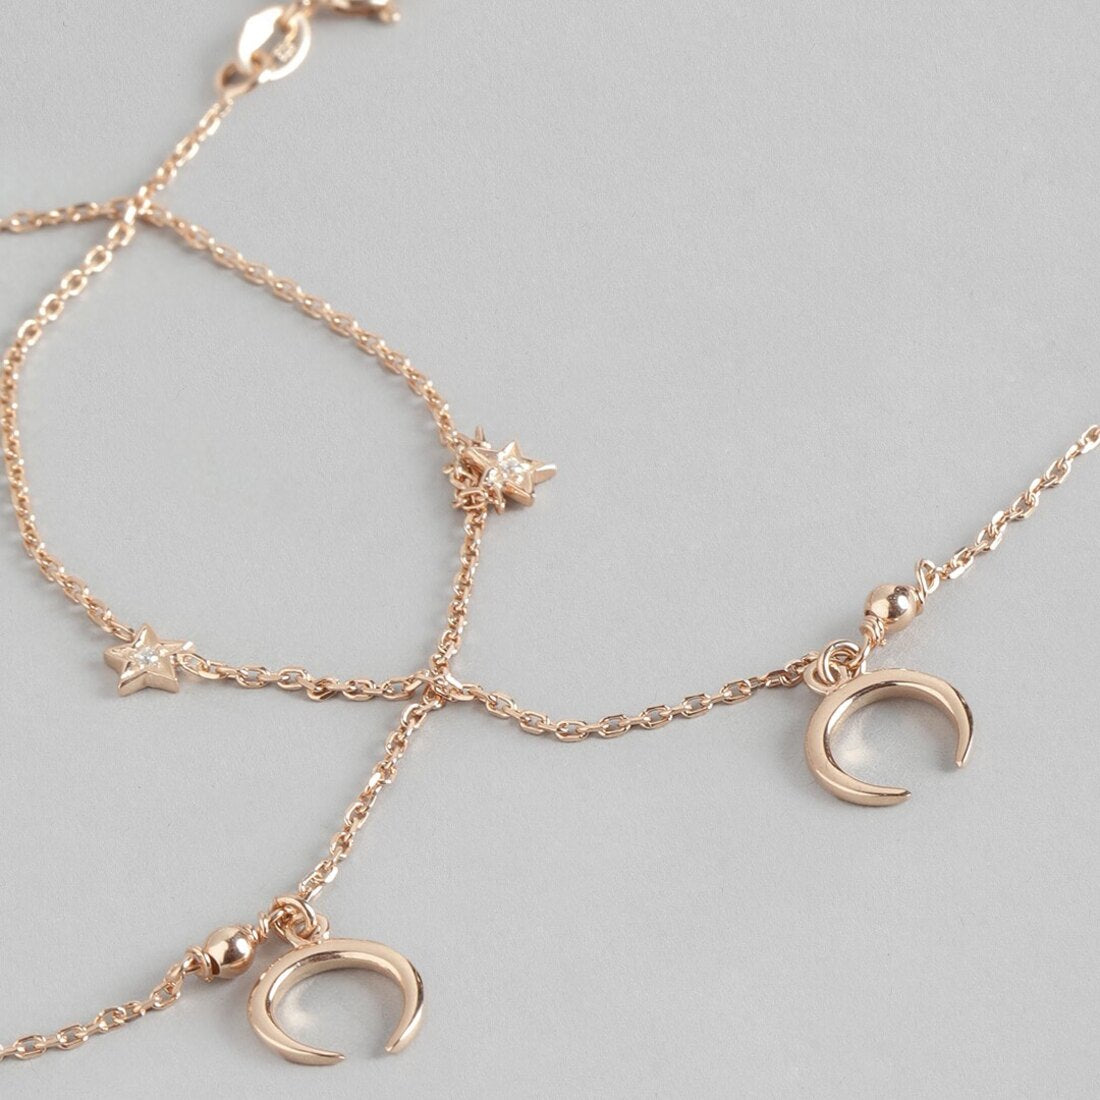 The Moon 925 Sterling Silver Anklet in Rose Gold